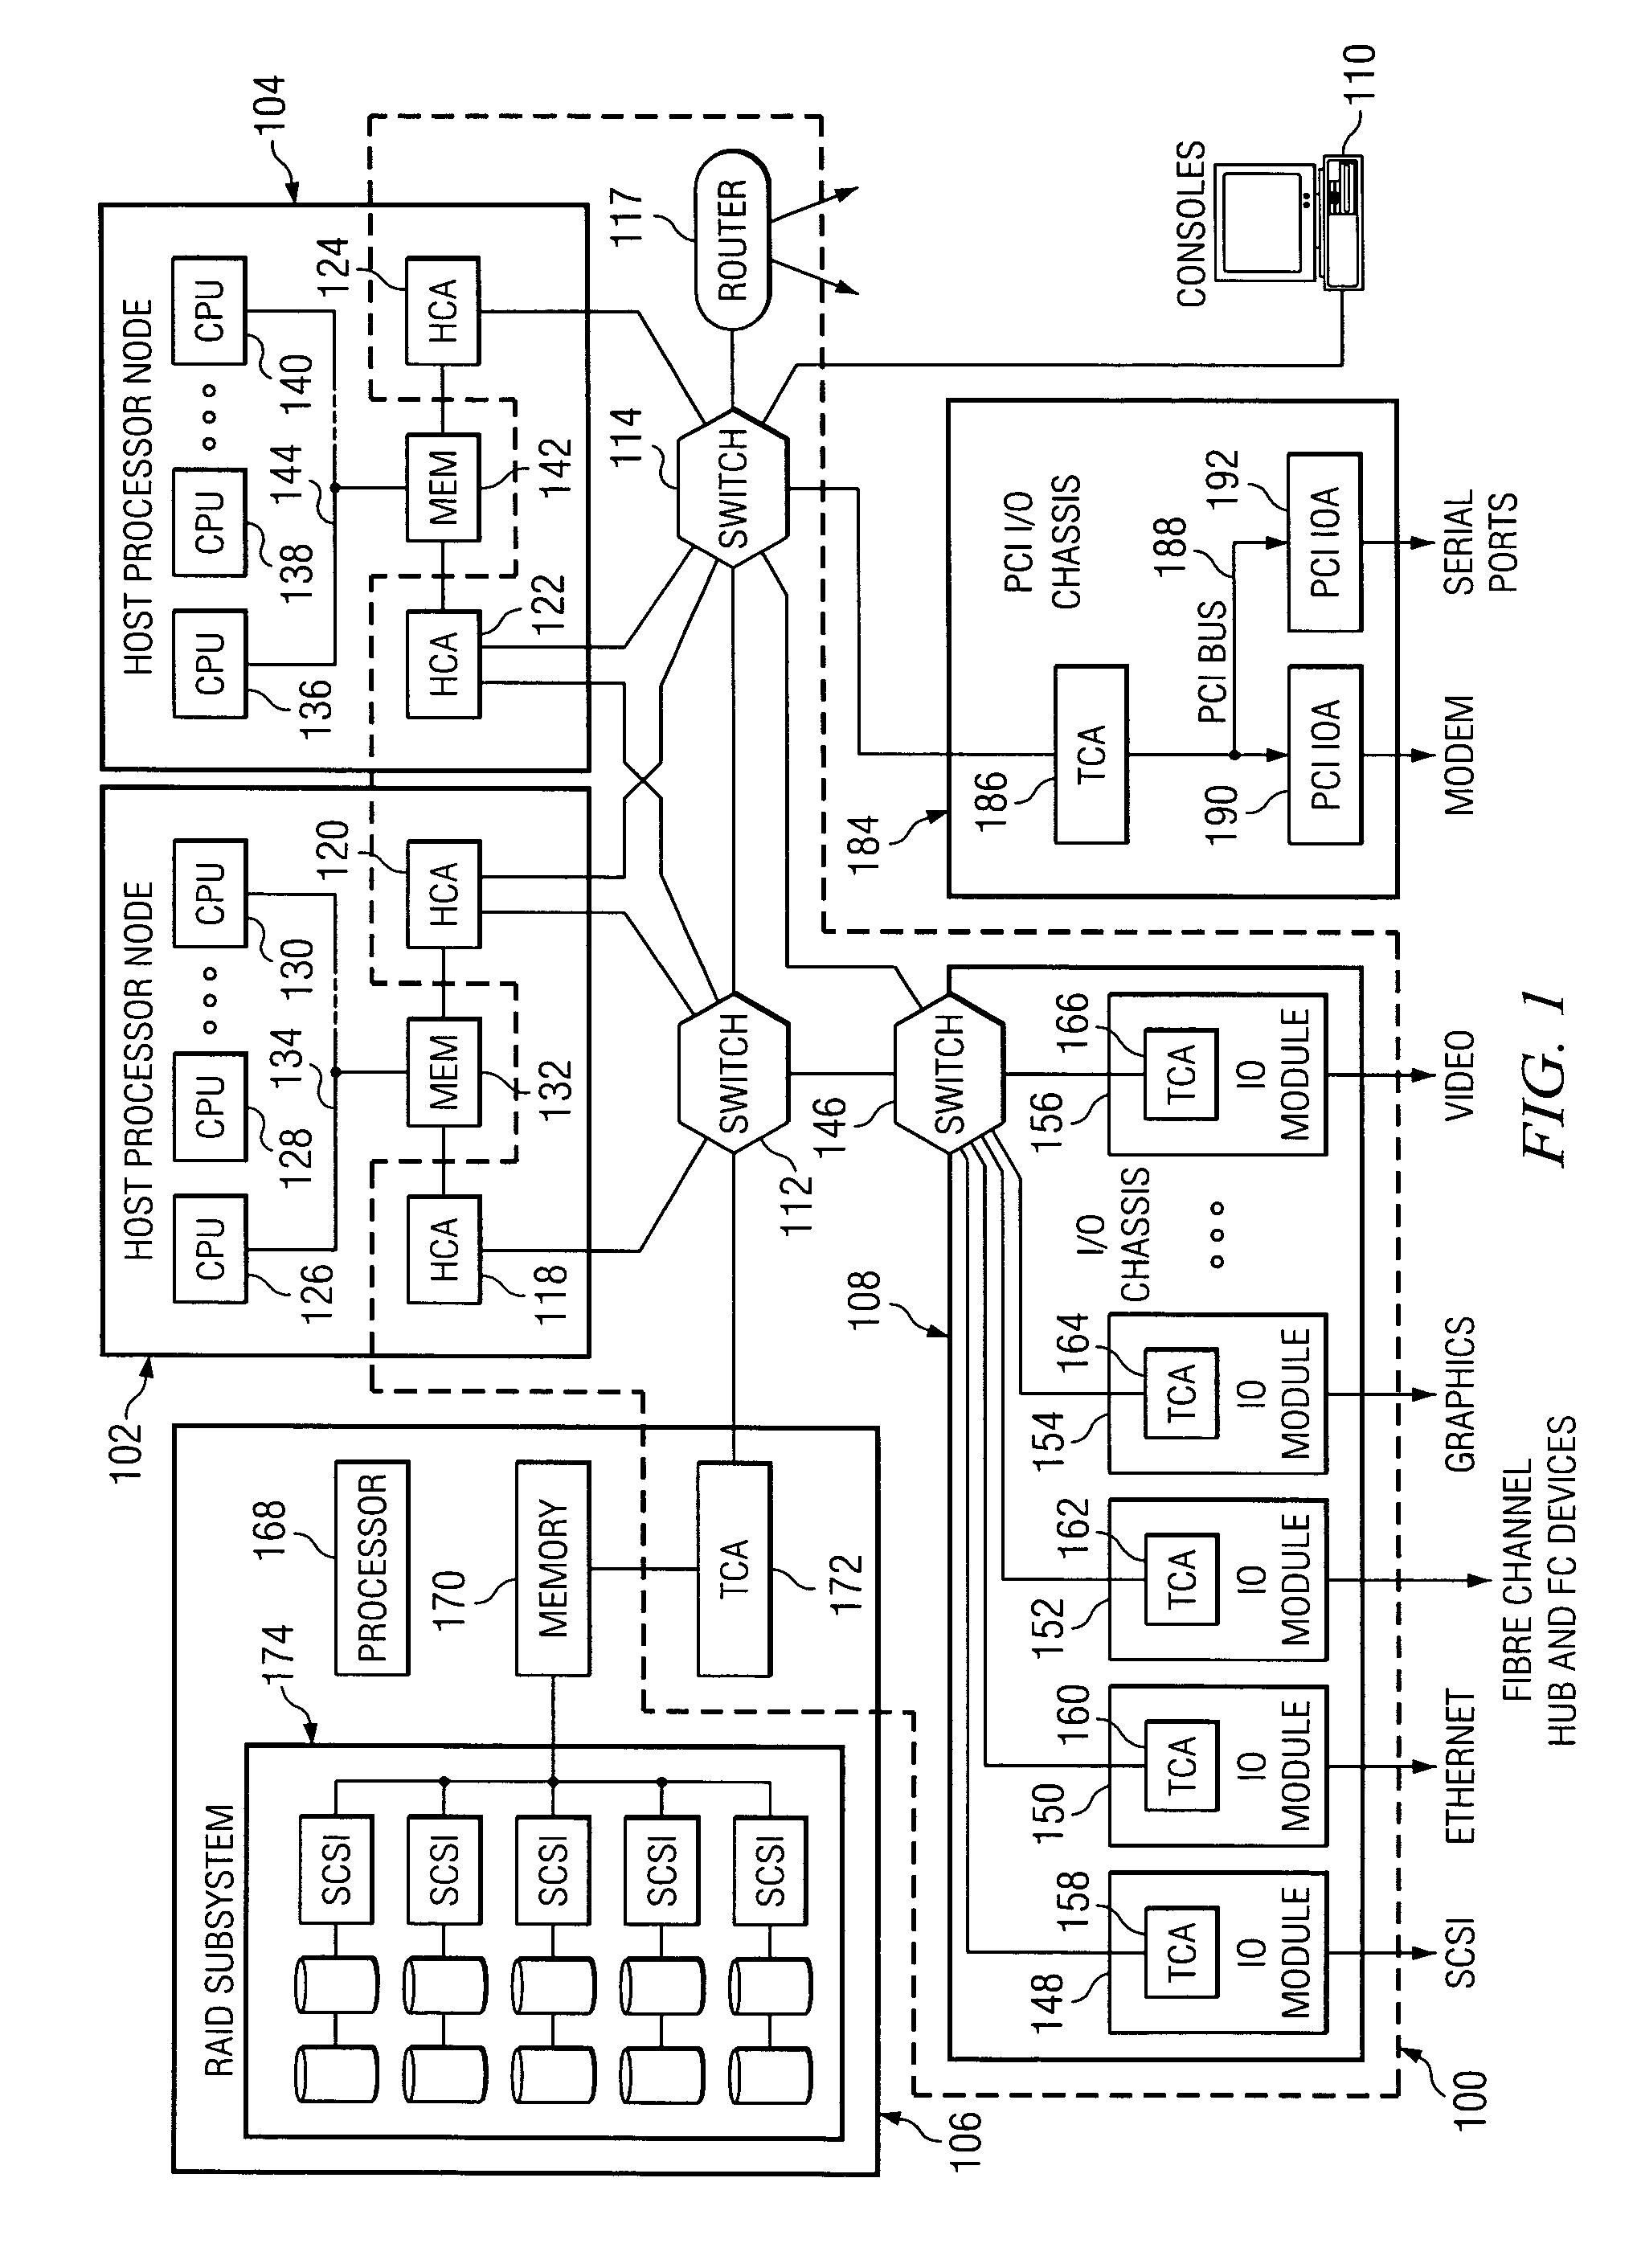 System and method for efficient implementation of a shared receive queue